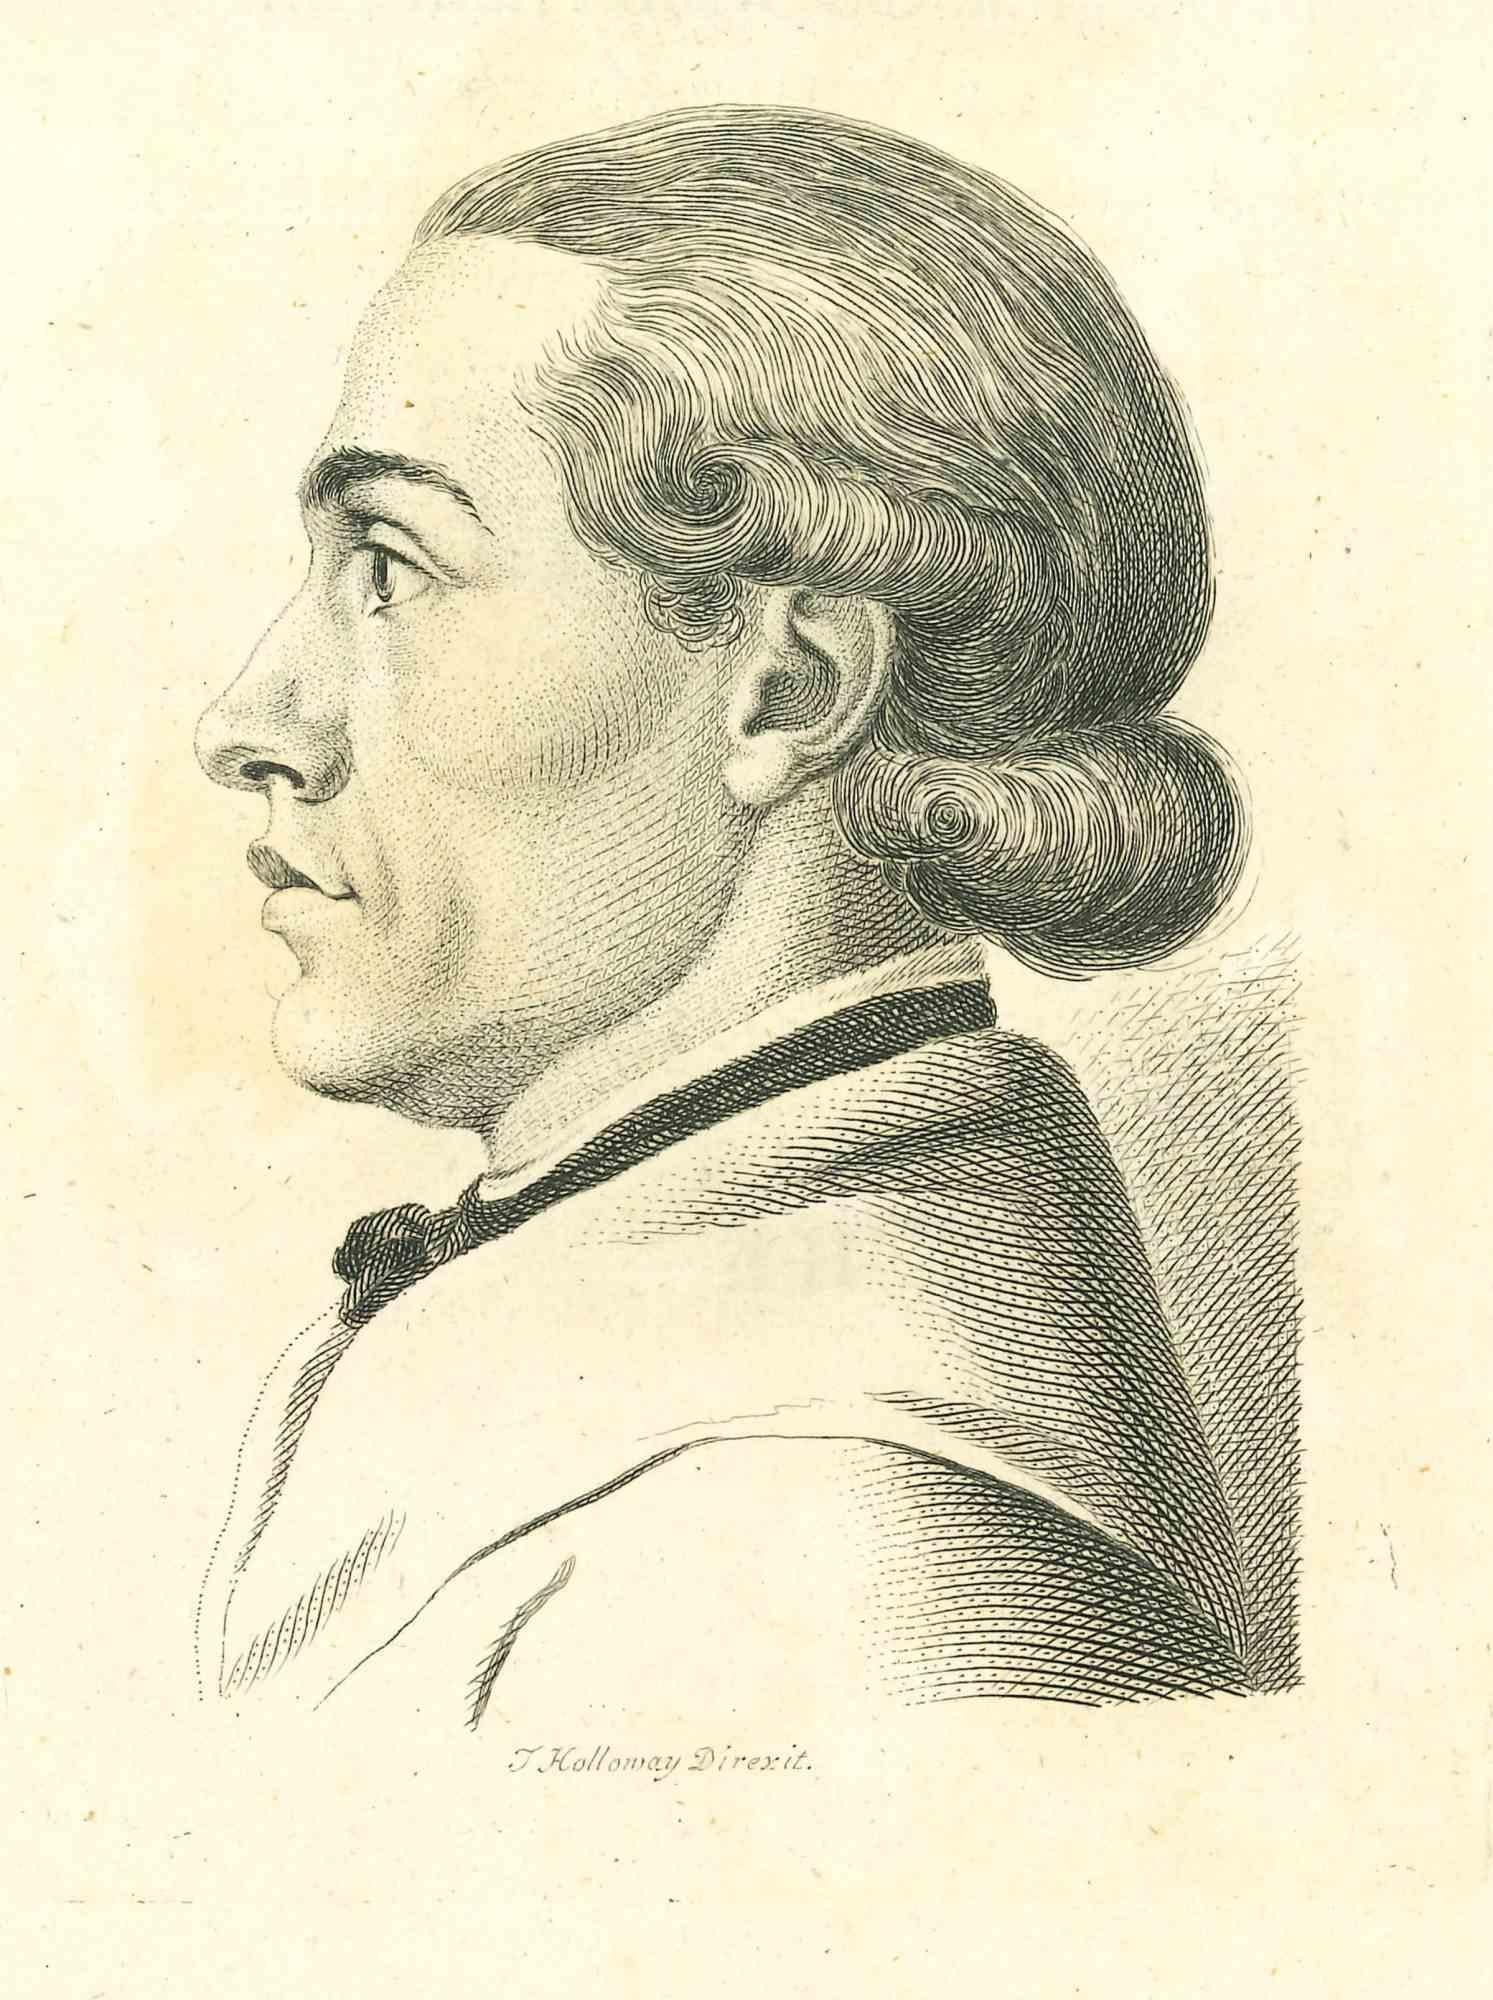 Portrait is an original artwork realized by Thomas Holloway (1748-1827).

Original Etching from J.C. Lavater's "Essays on Physiognomy, Designed to promote the Knowledge and the Love of Mankind", London, Bensley, 1810. 

This artwork portrays a man.